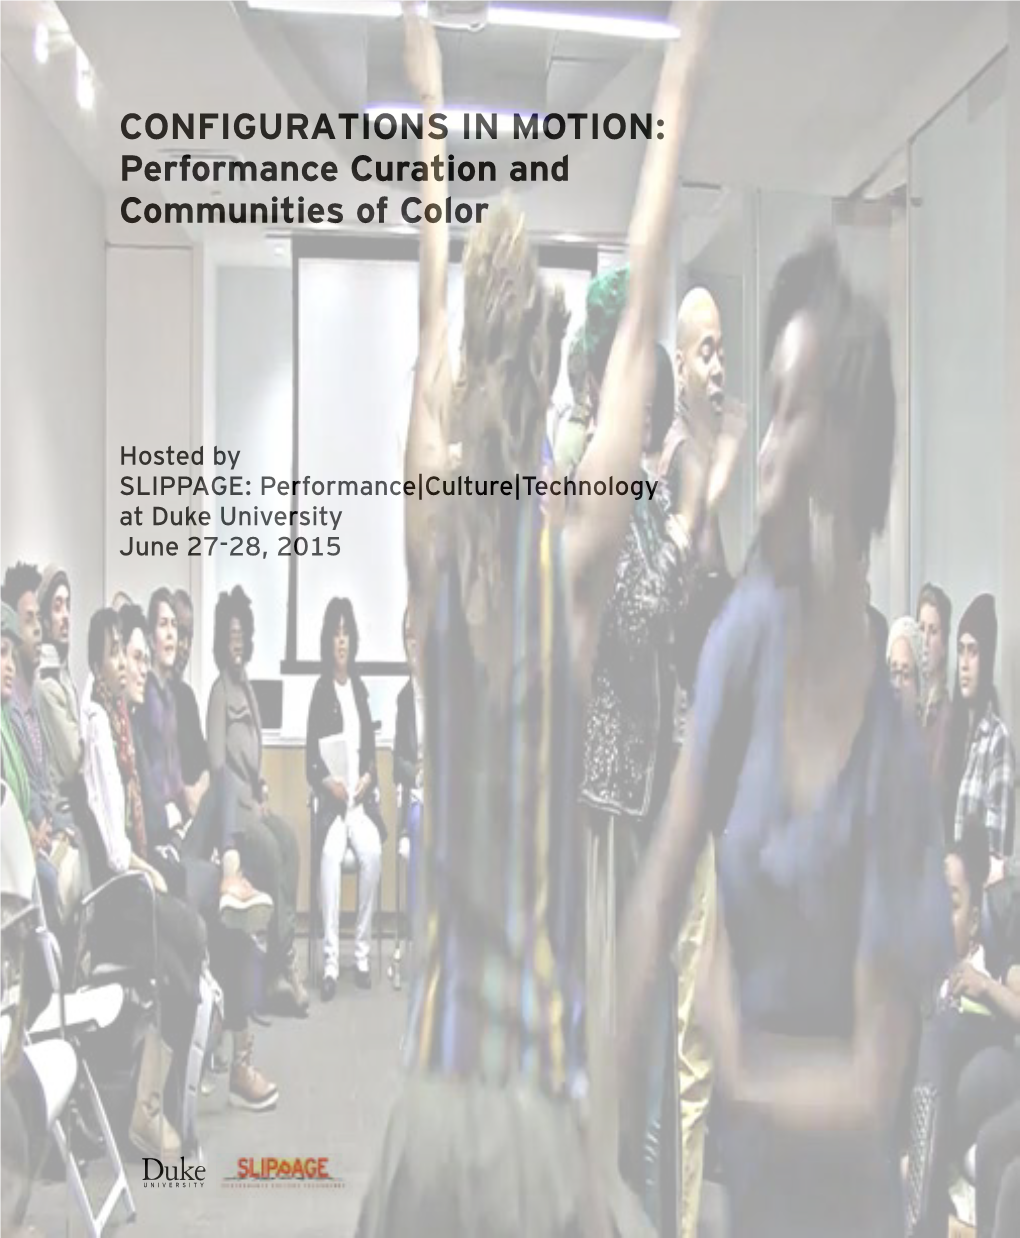 CONFIGURATIONS in MOTION: Performance Curation and Communities of Color